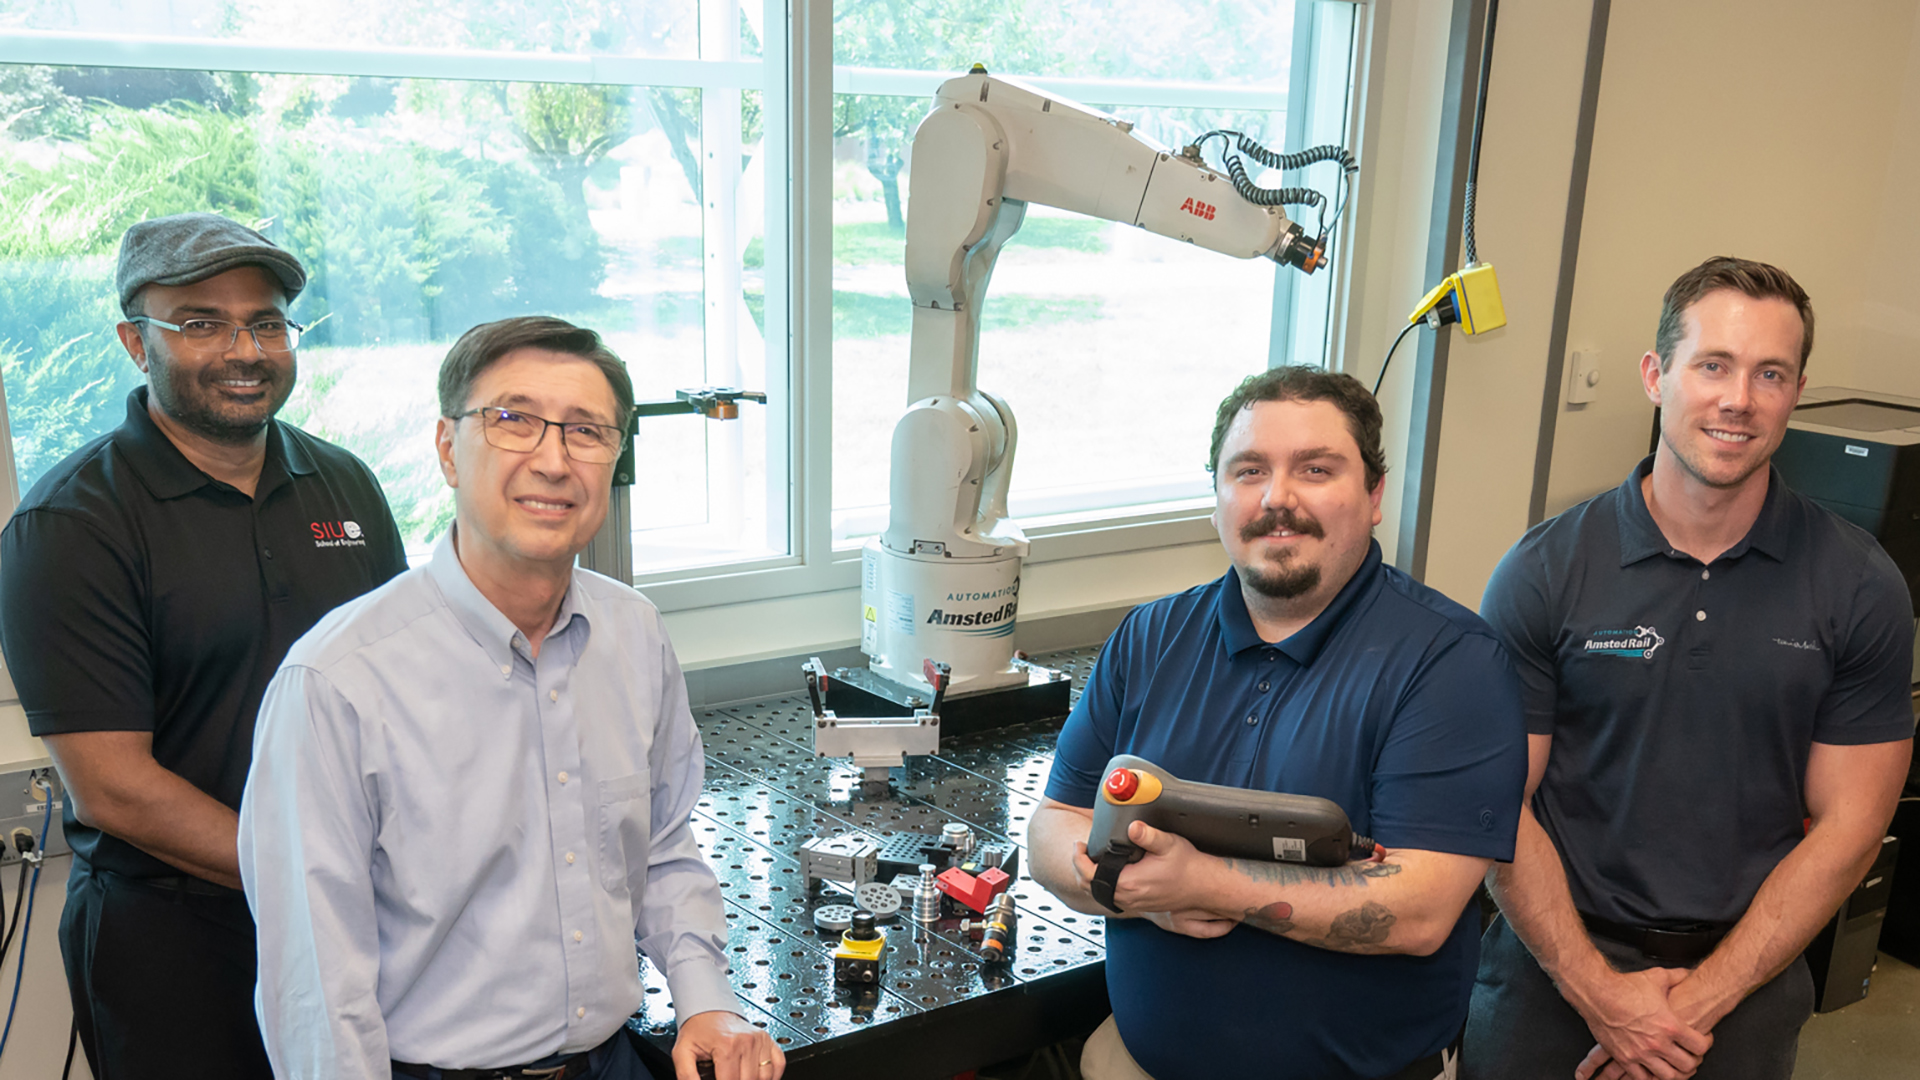 Robotic arm donation from Amsted Rail